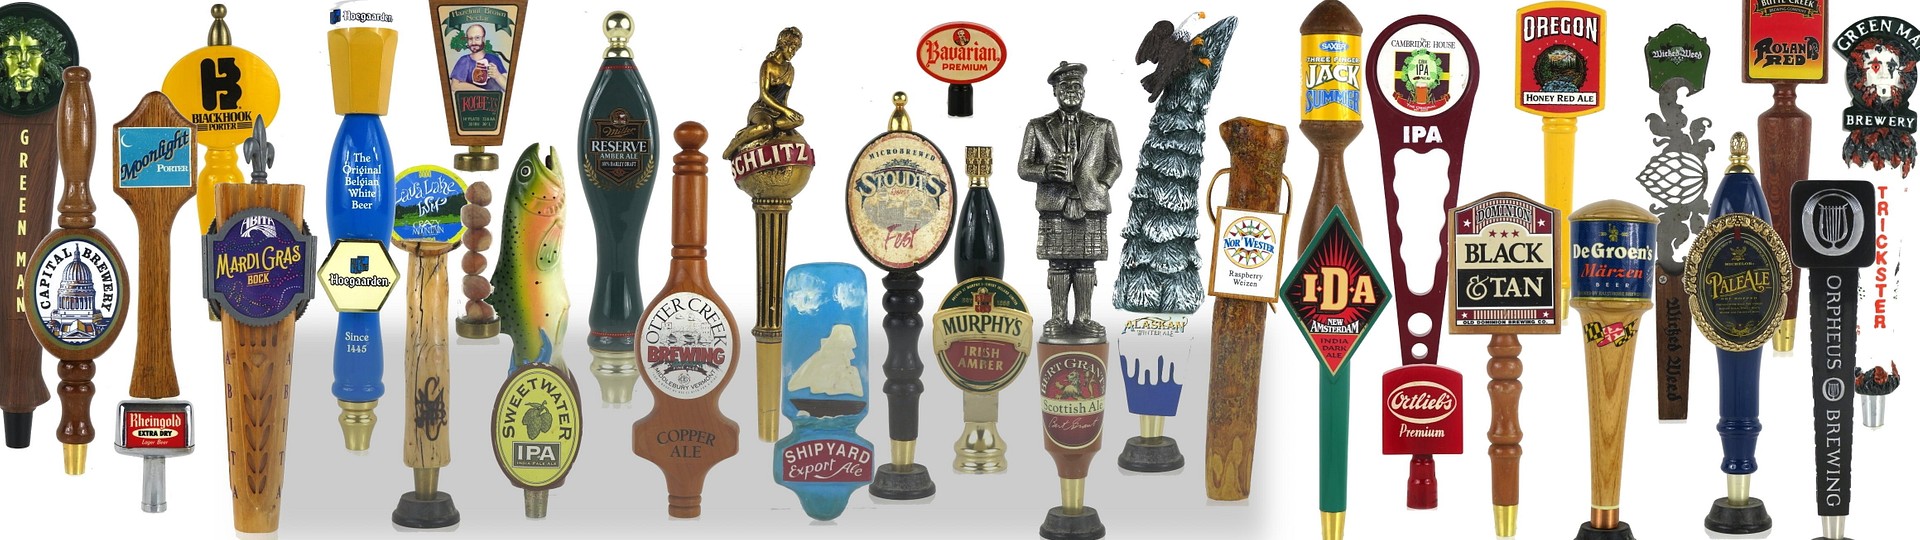 TavernTrove's Vintage US, Craft Brewery, and Foreign Beer Tap Auction (Day 1) by TavernTrove